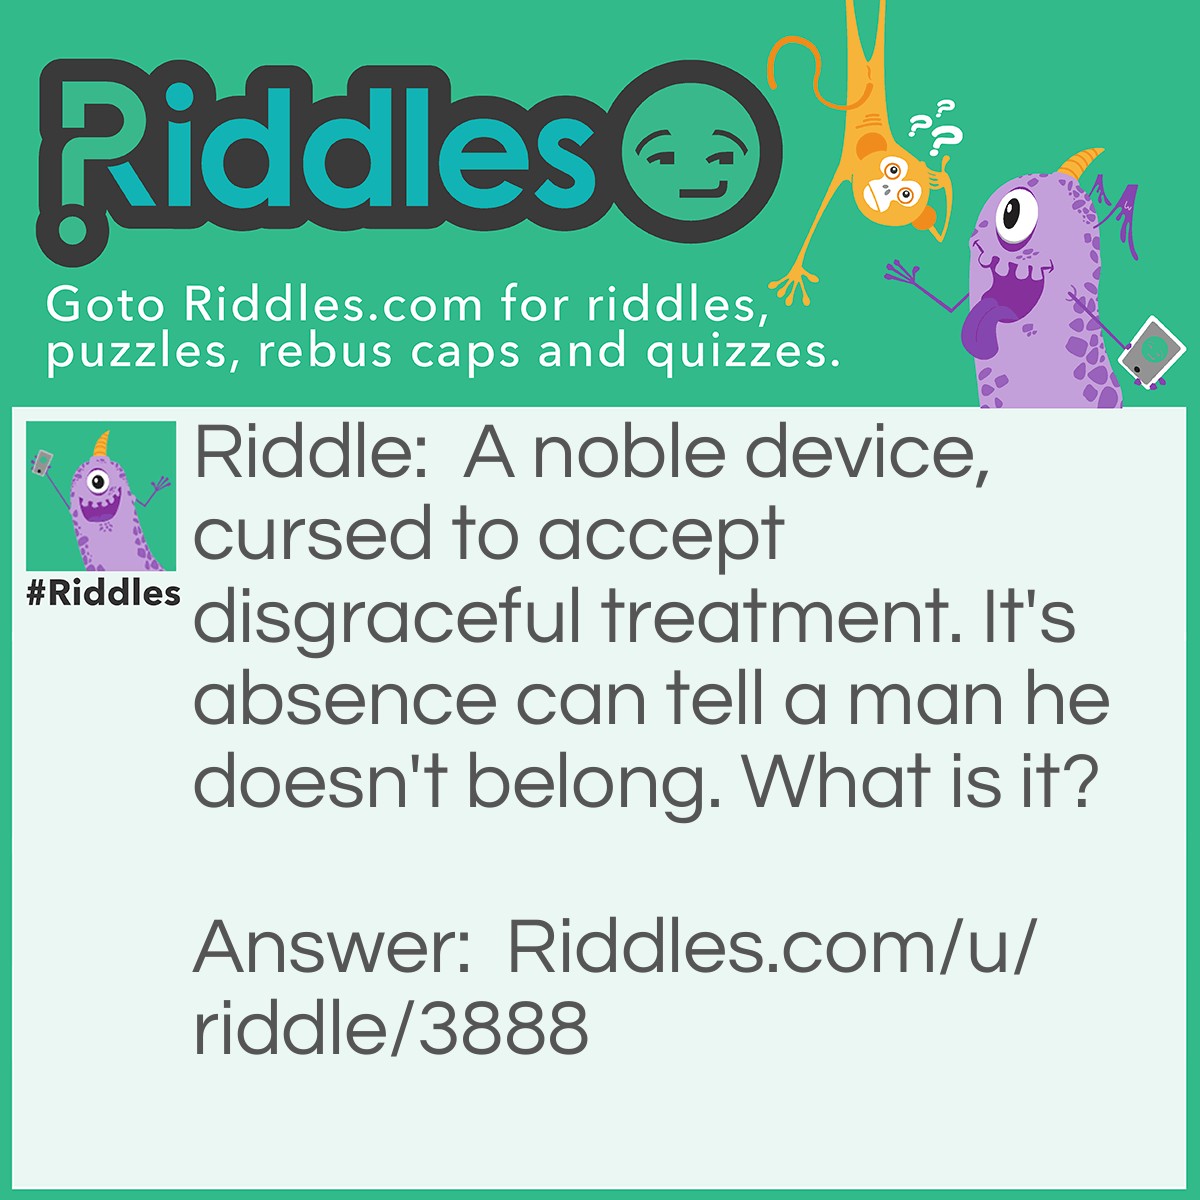 Riddle: A noble device, cursed to accept disgraceful treatment. It's absence can tell a man he doesn't belong. What is it? Answer: A urinal.